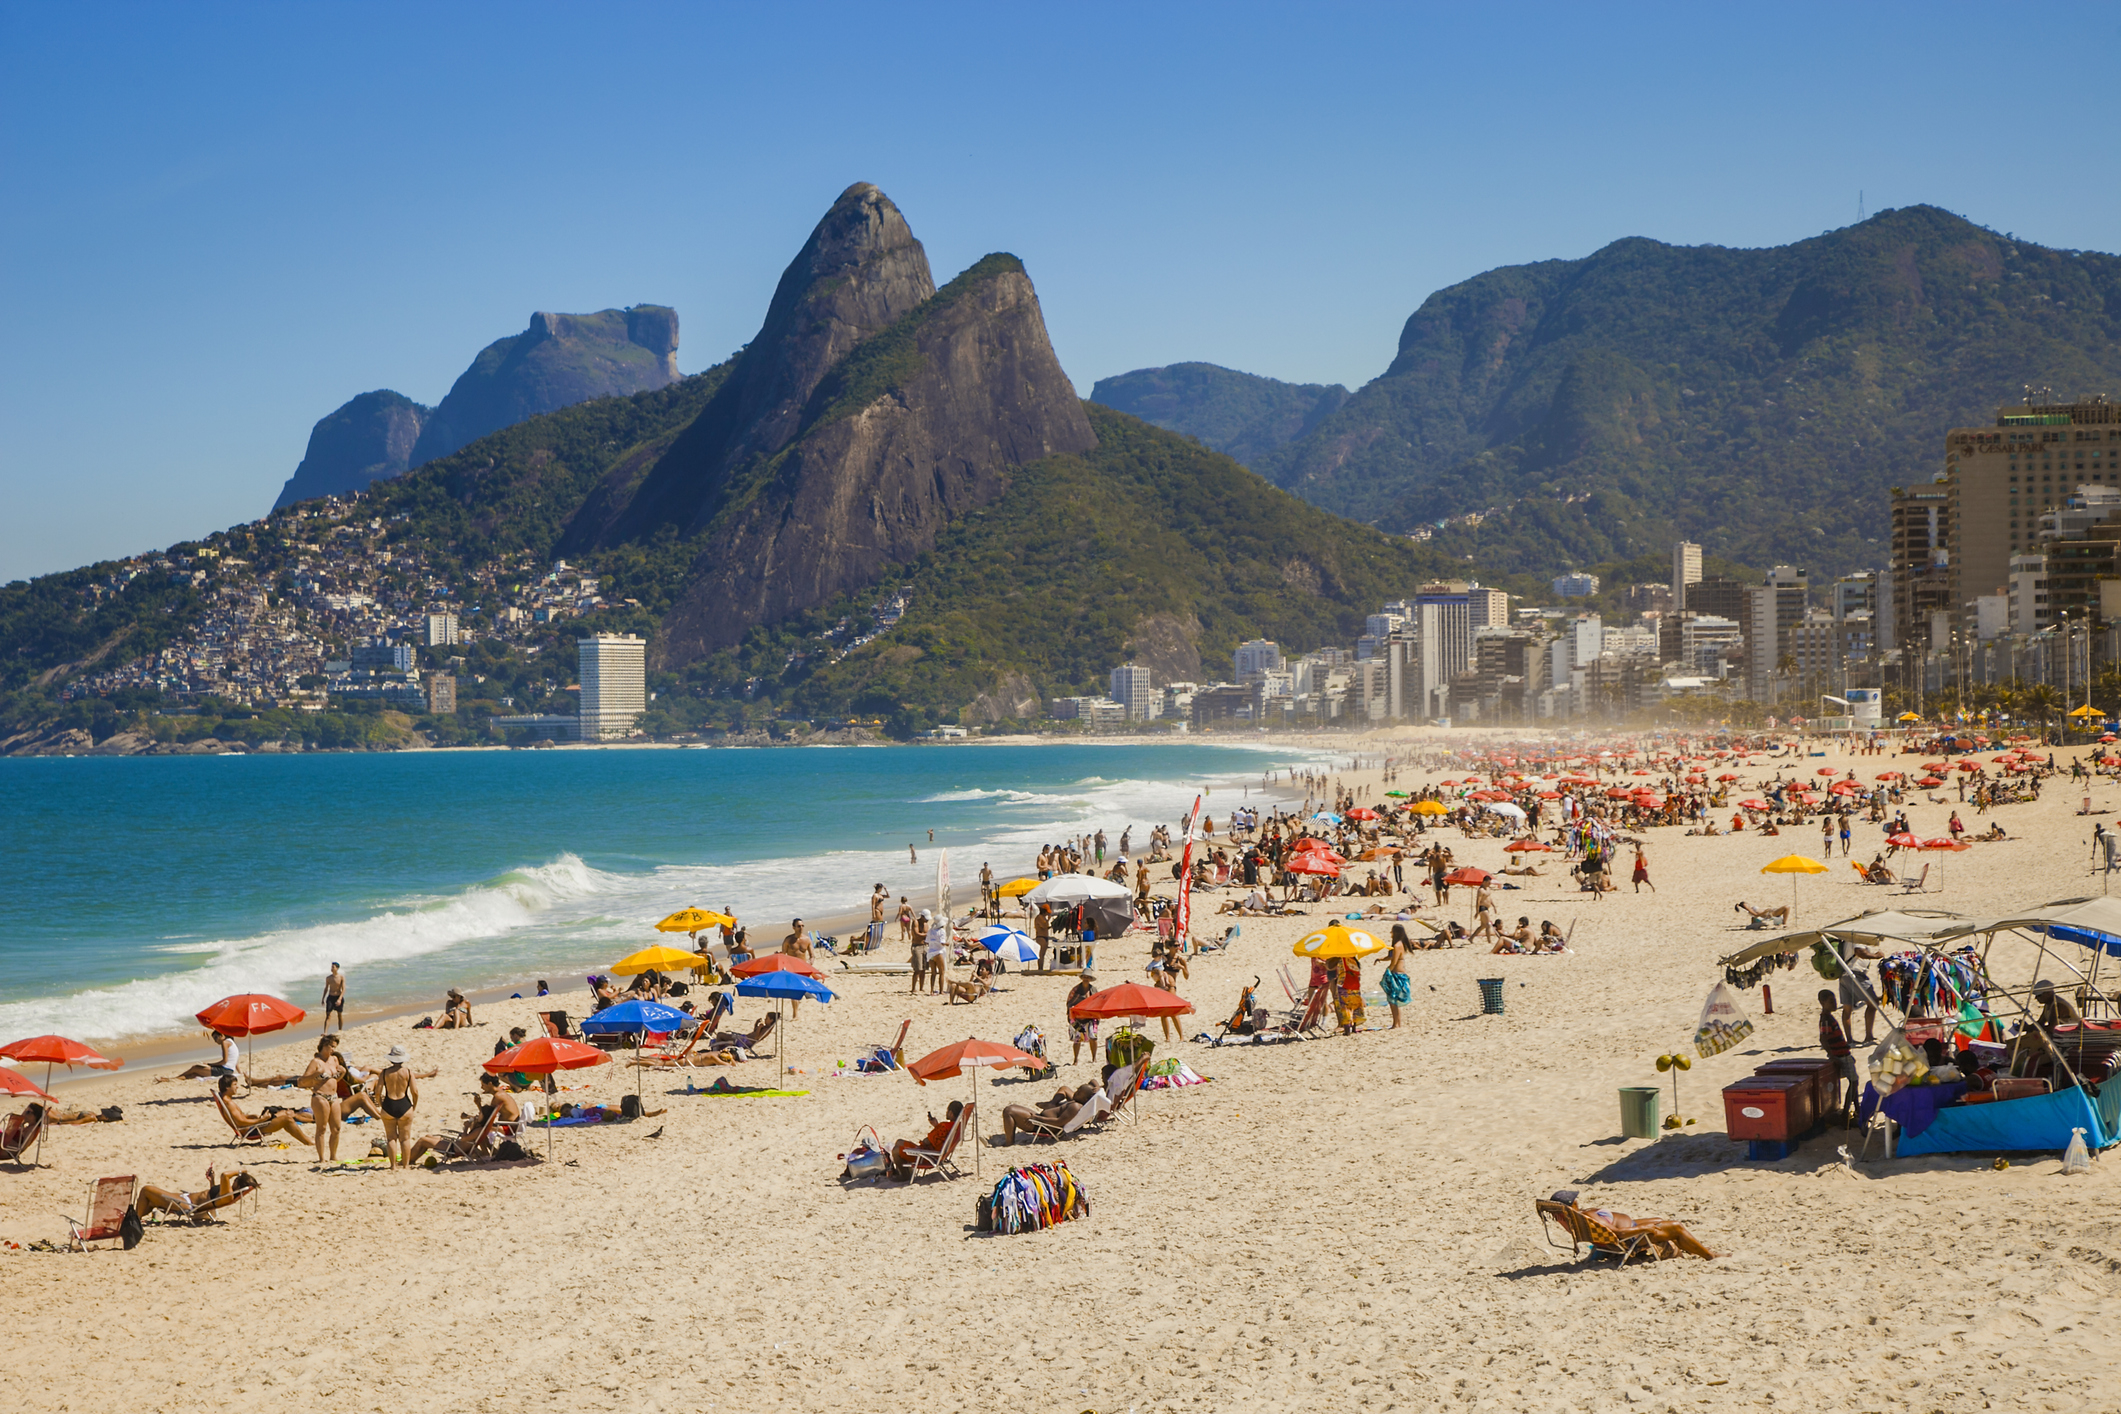 Crowded beach with people sunbathing and umbrellas in Rio